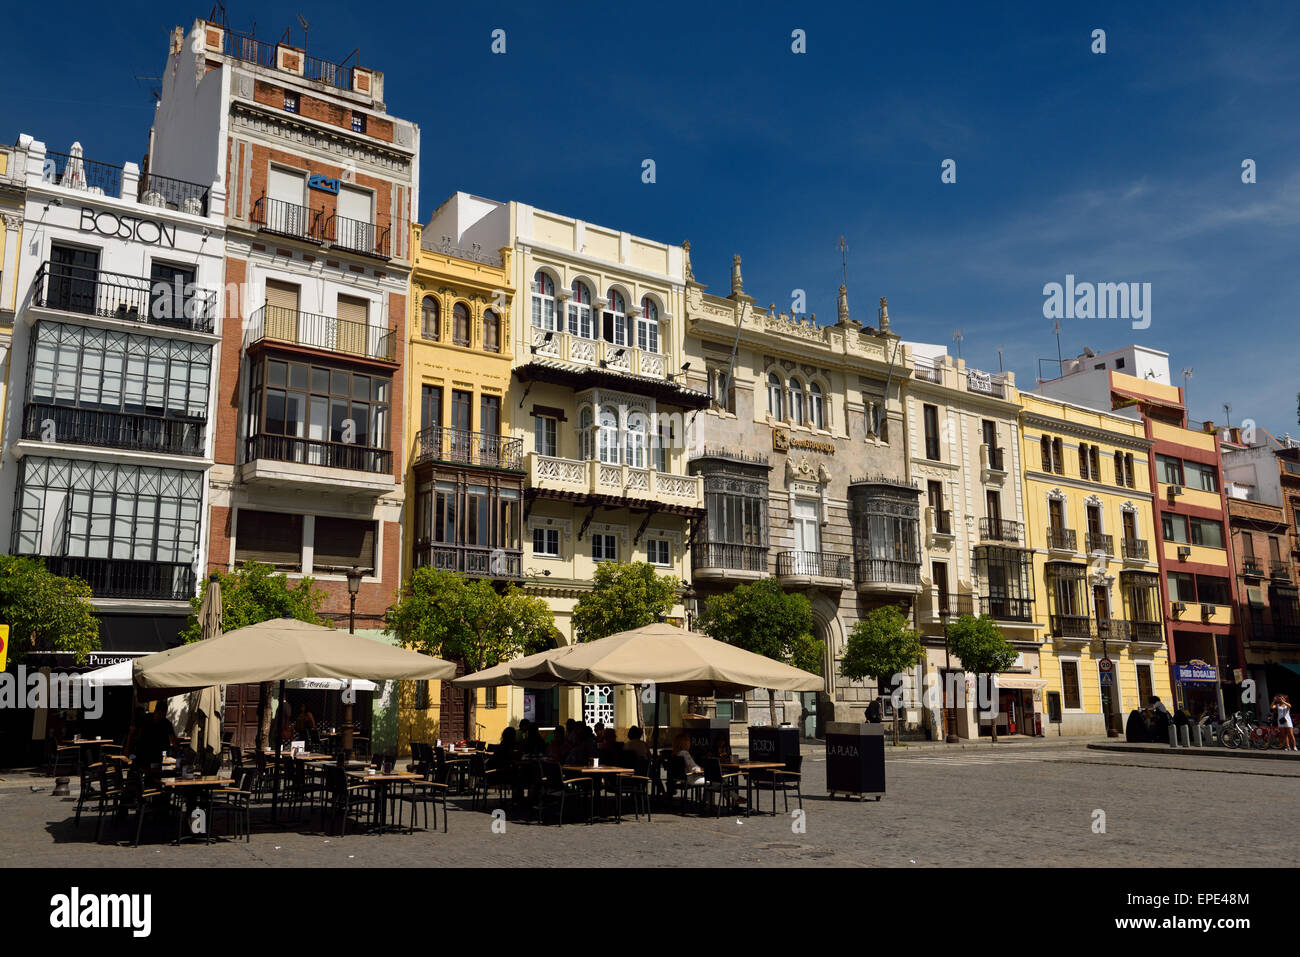 Outdoor patio with tourists and varied architectural styles in Plaza de San Francisco Seville Spain Stock Photo